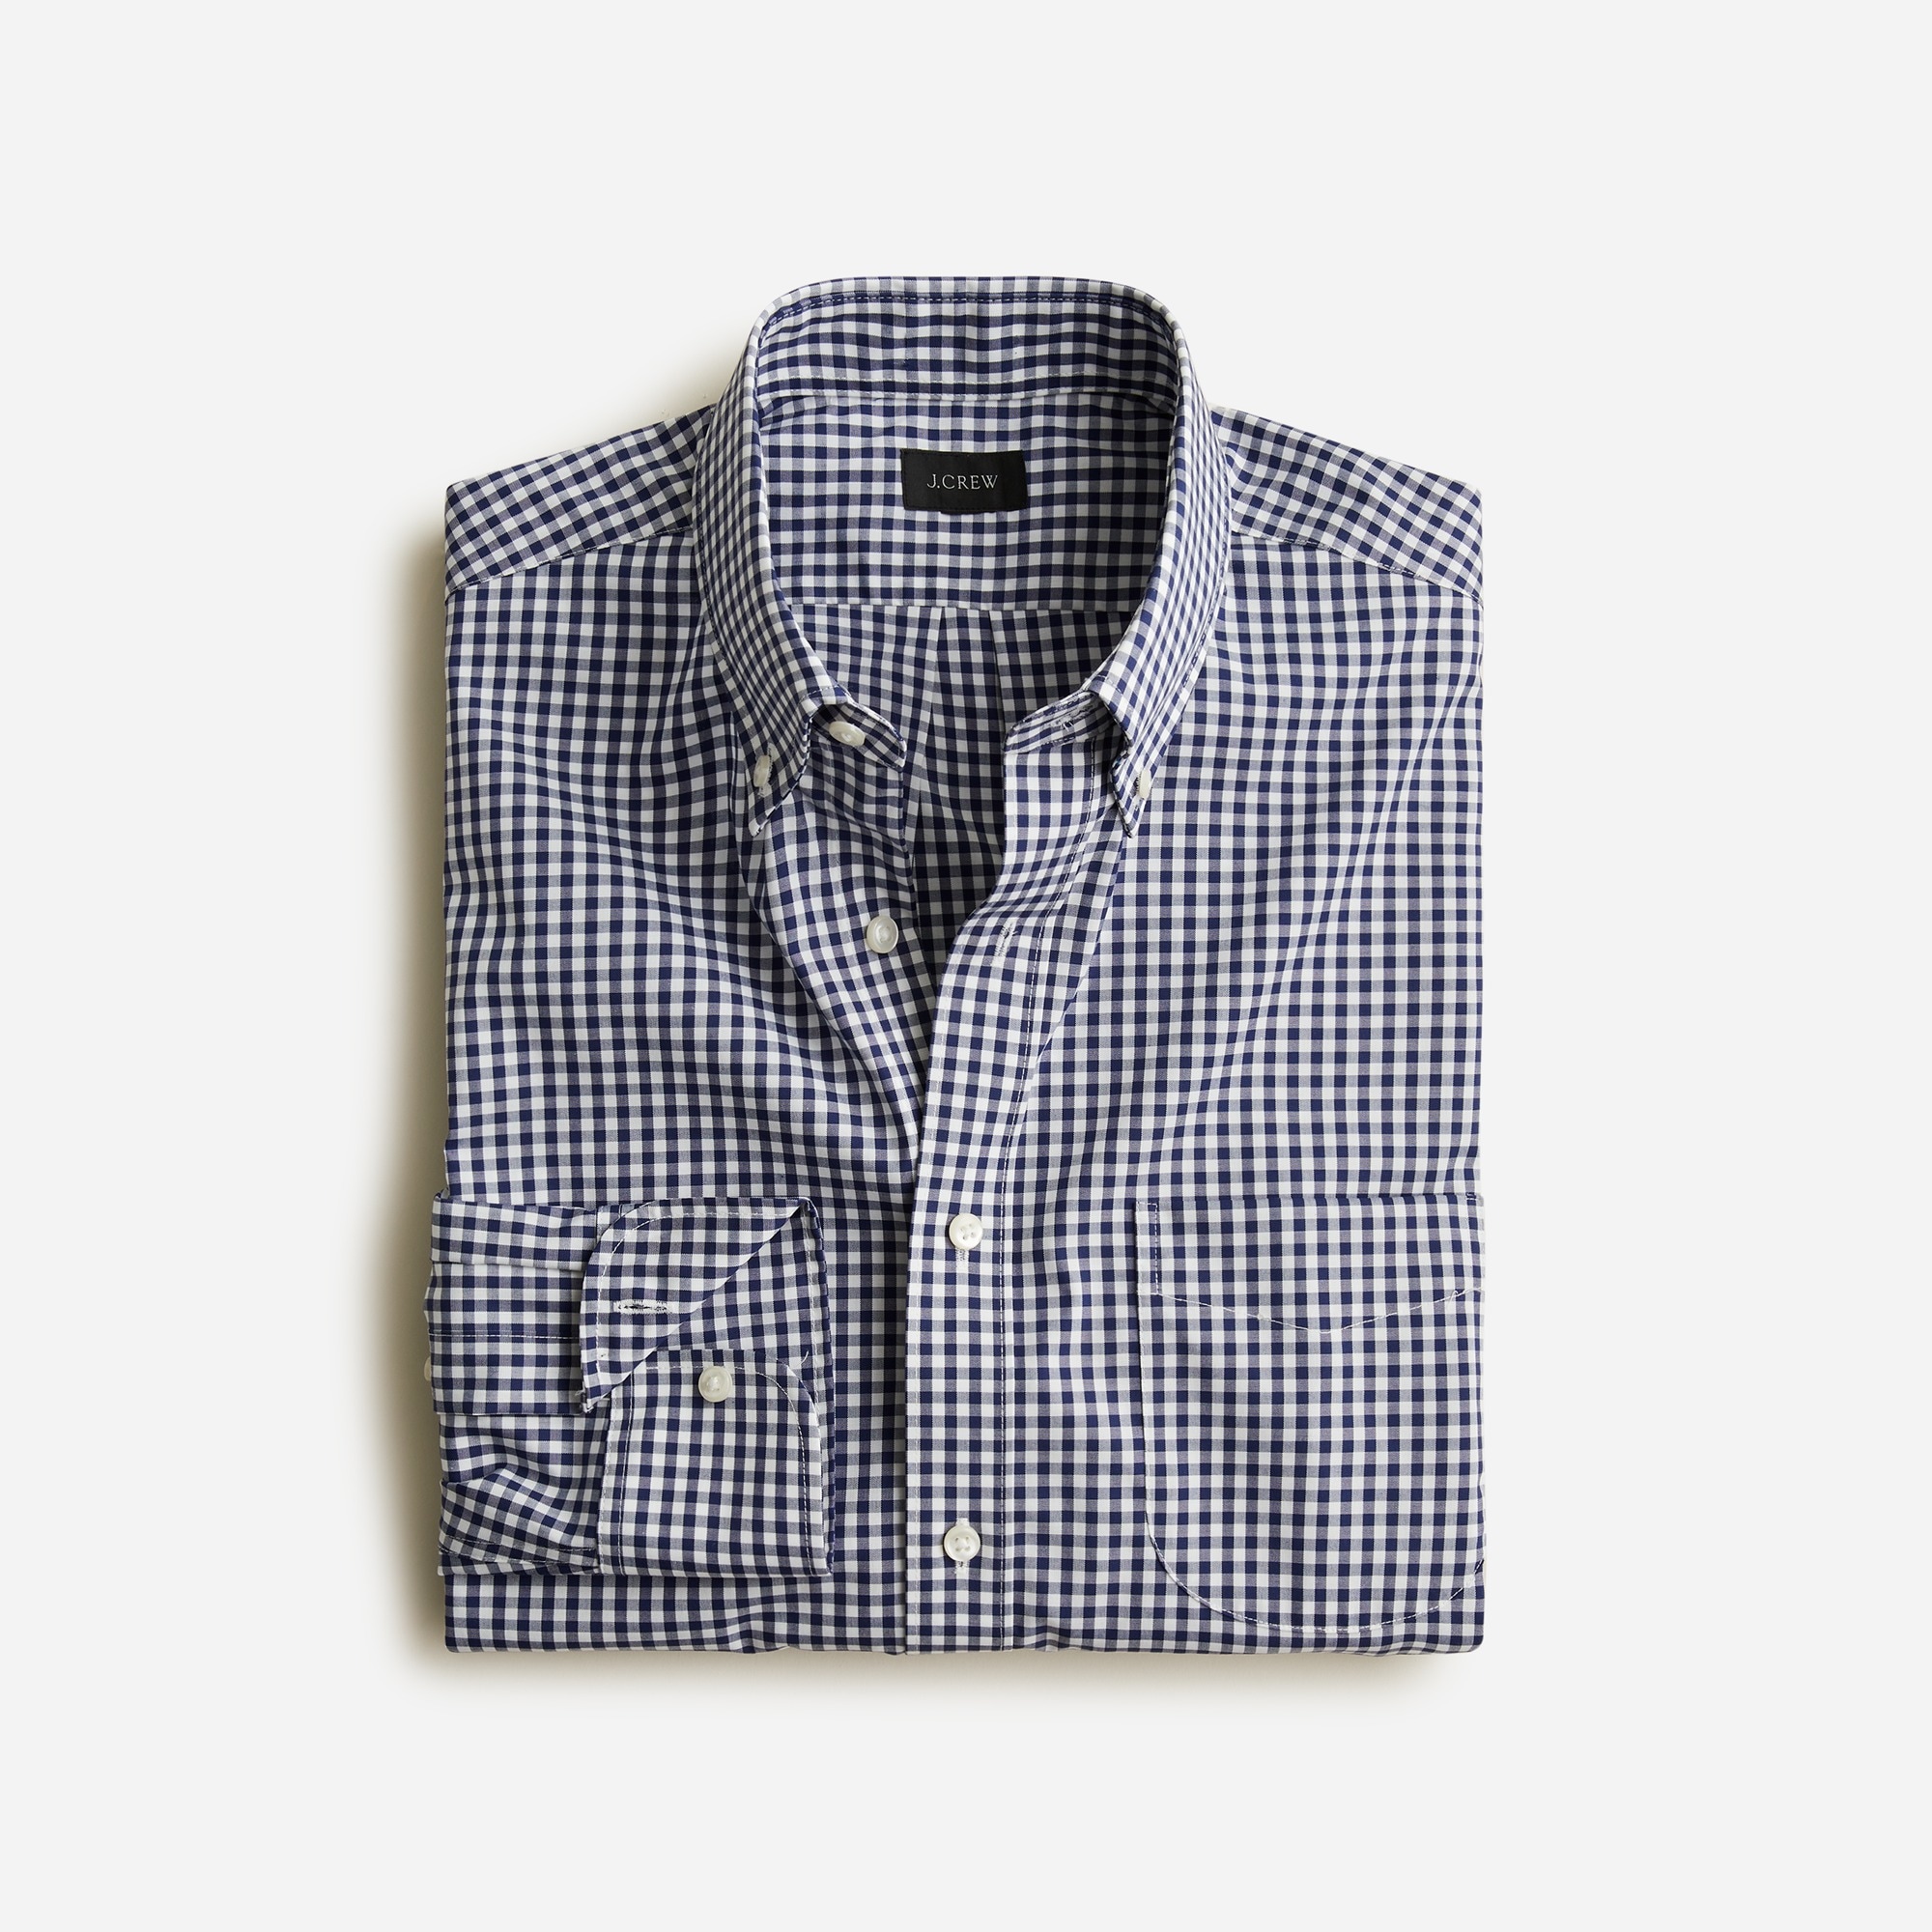 Jcrew Bowery wrinkle-free dress shirt with button-down collar